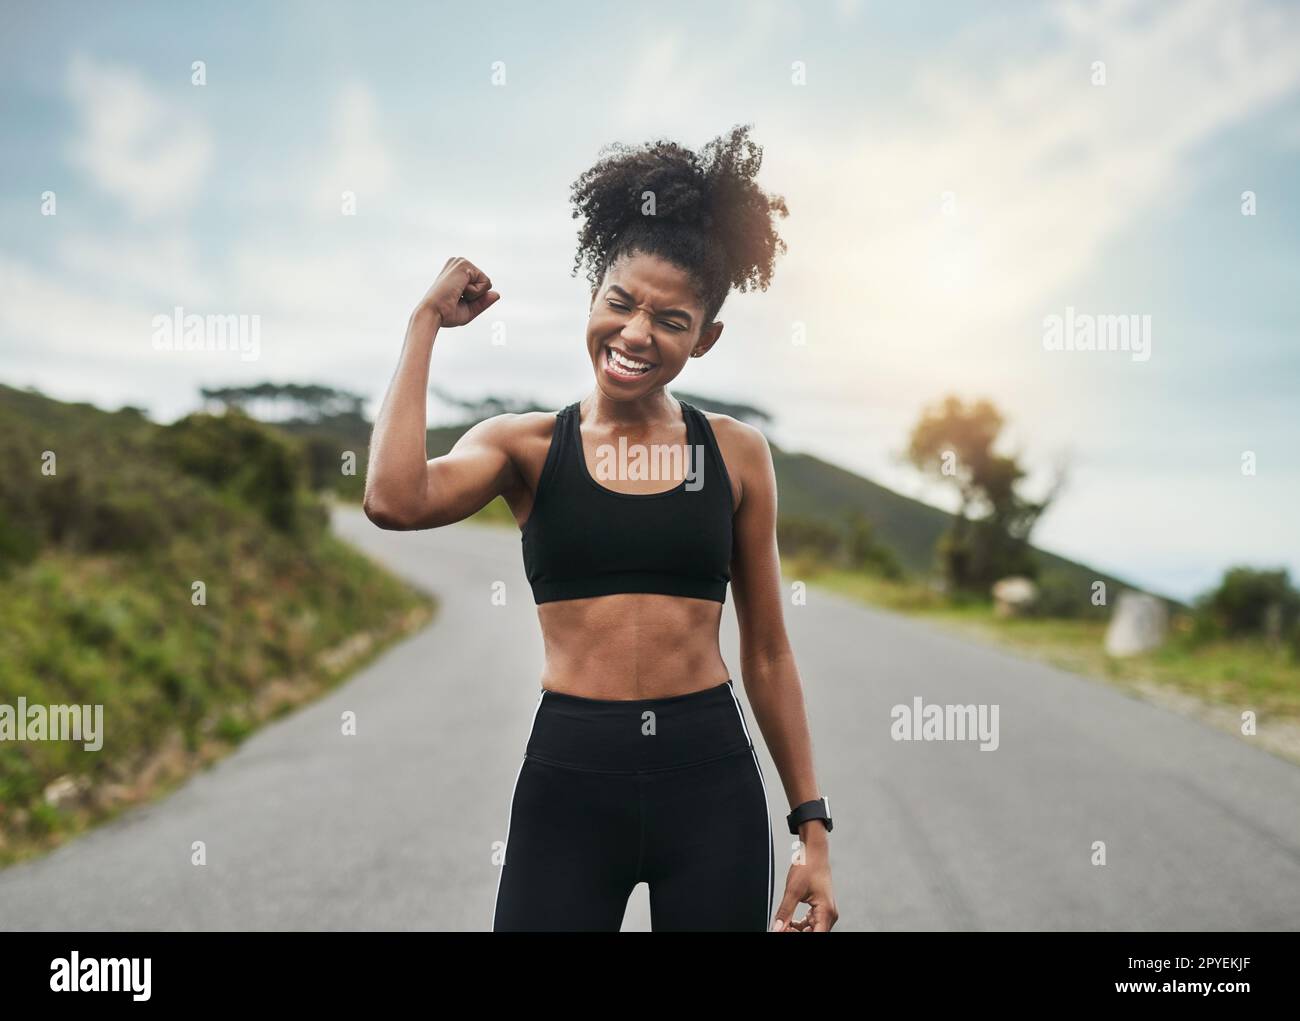 https://c8.alamy.com/comp/2PYEKJF/strong-is-a-mindset-an-attractive-young-sportswoman-flexing-her-bicep-outside-2PYEKJF.jpg